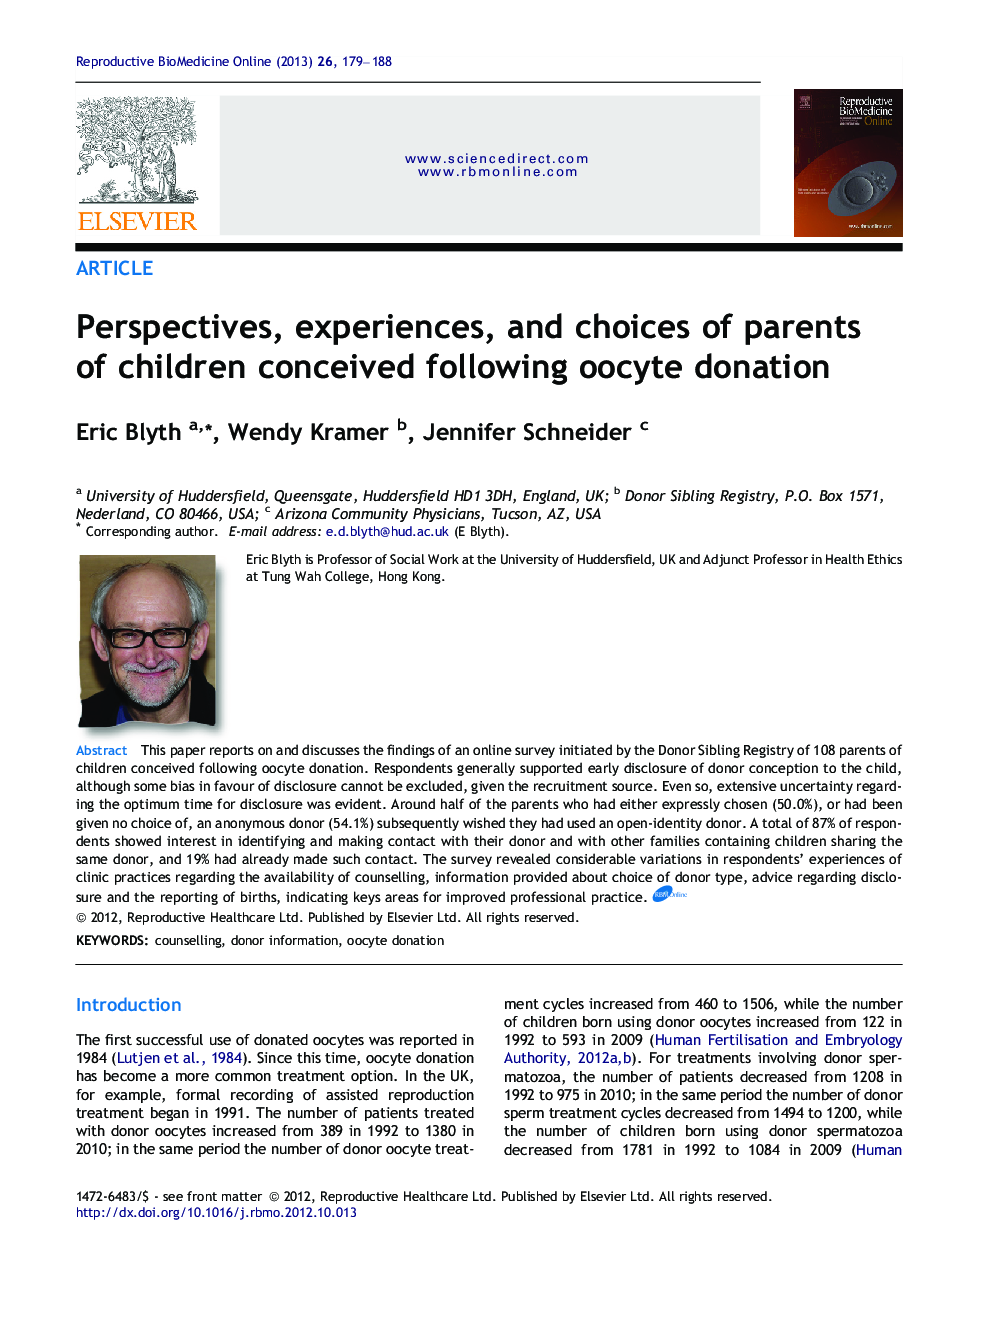 Perspectives, experiences, and choices of parents of children conceived following oocyte donation 